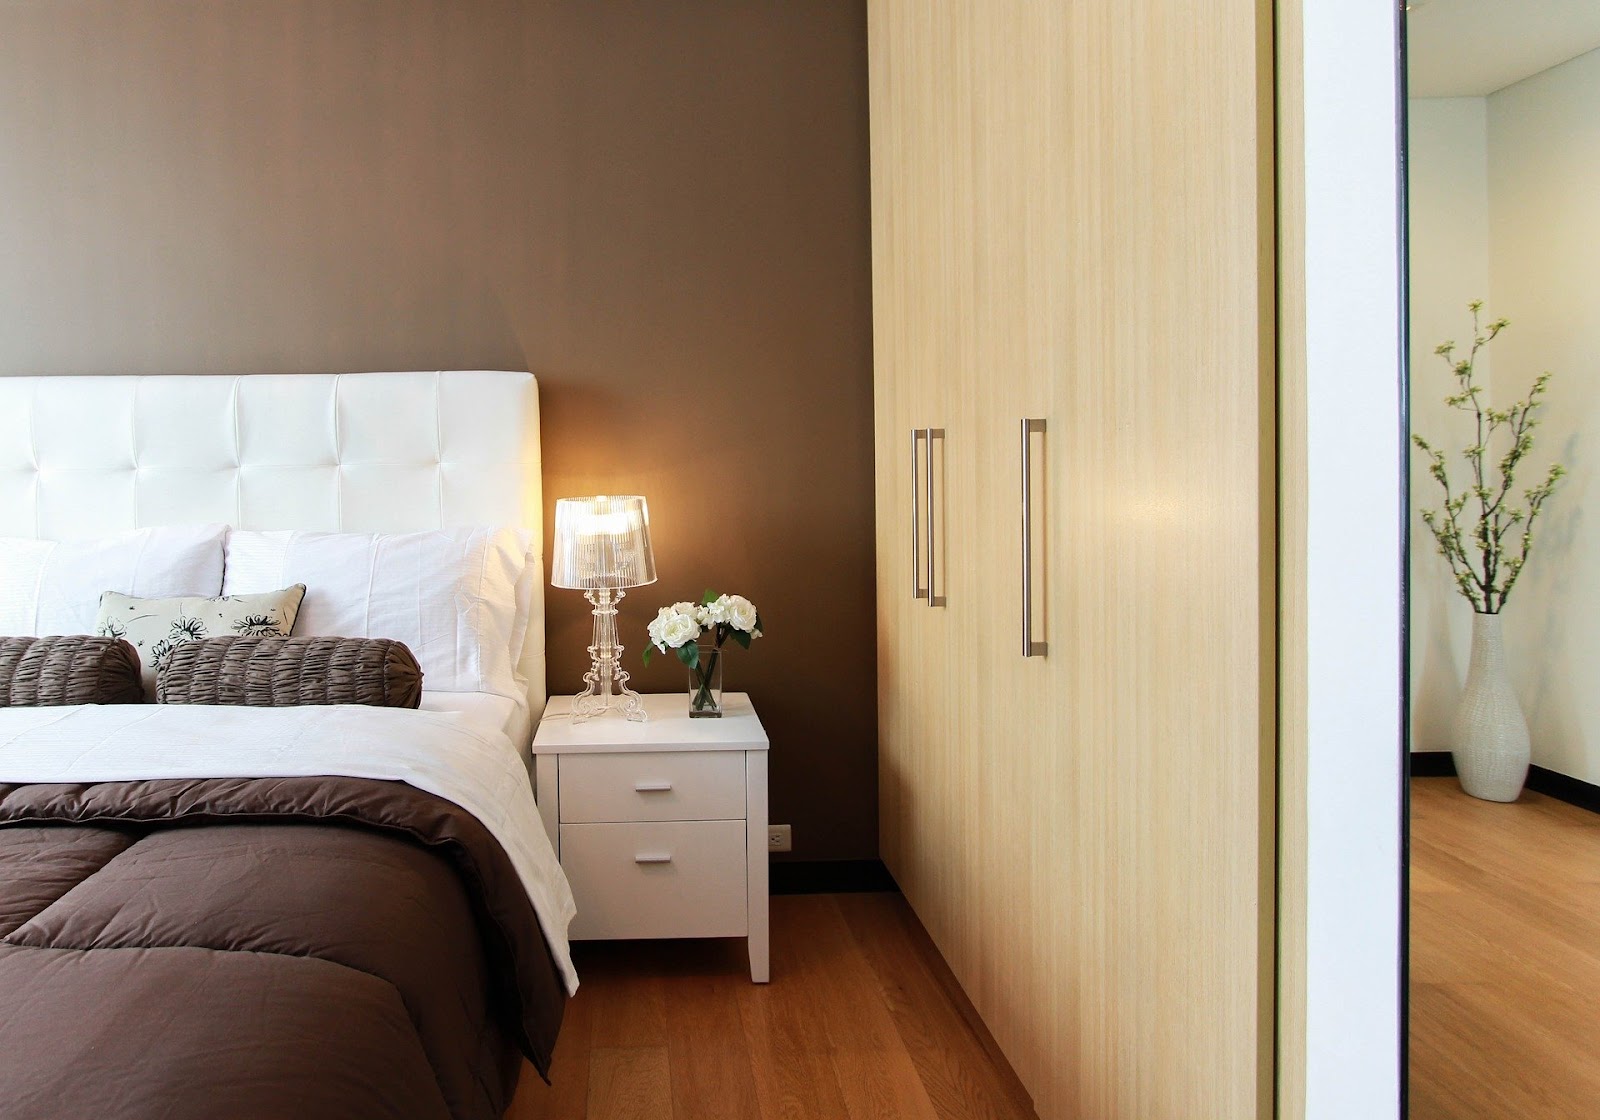 Bedroom furniture with fitted wardrobes